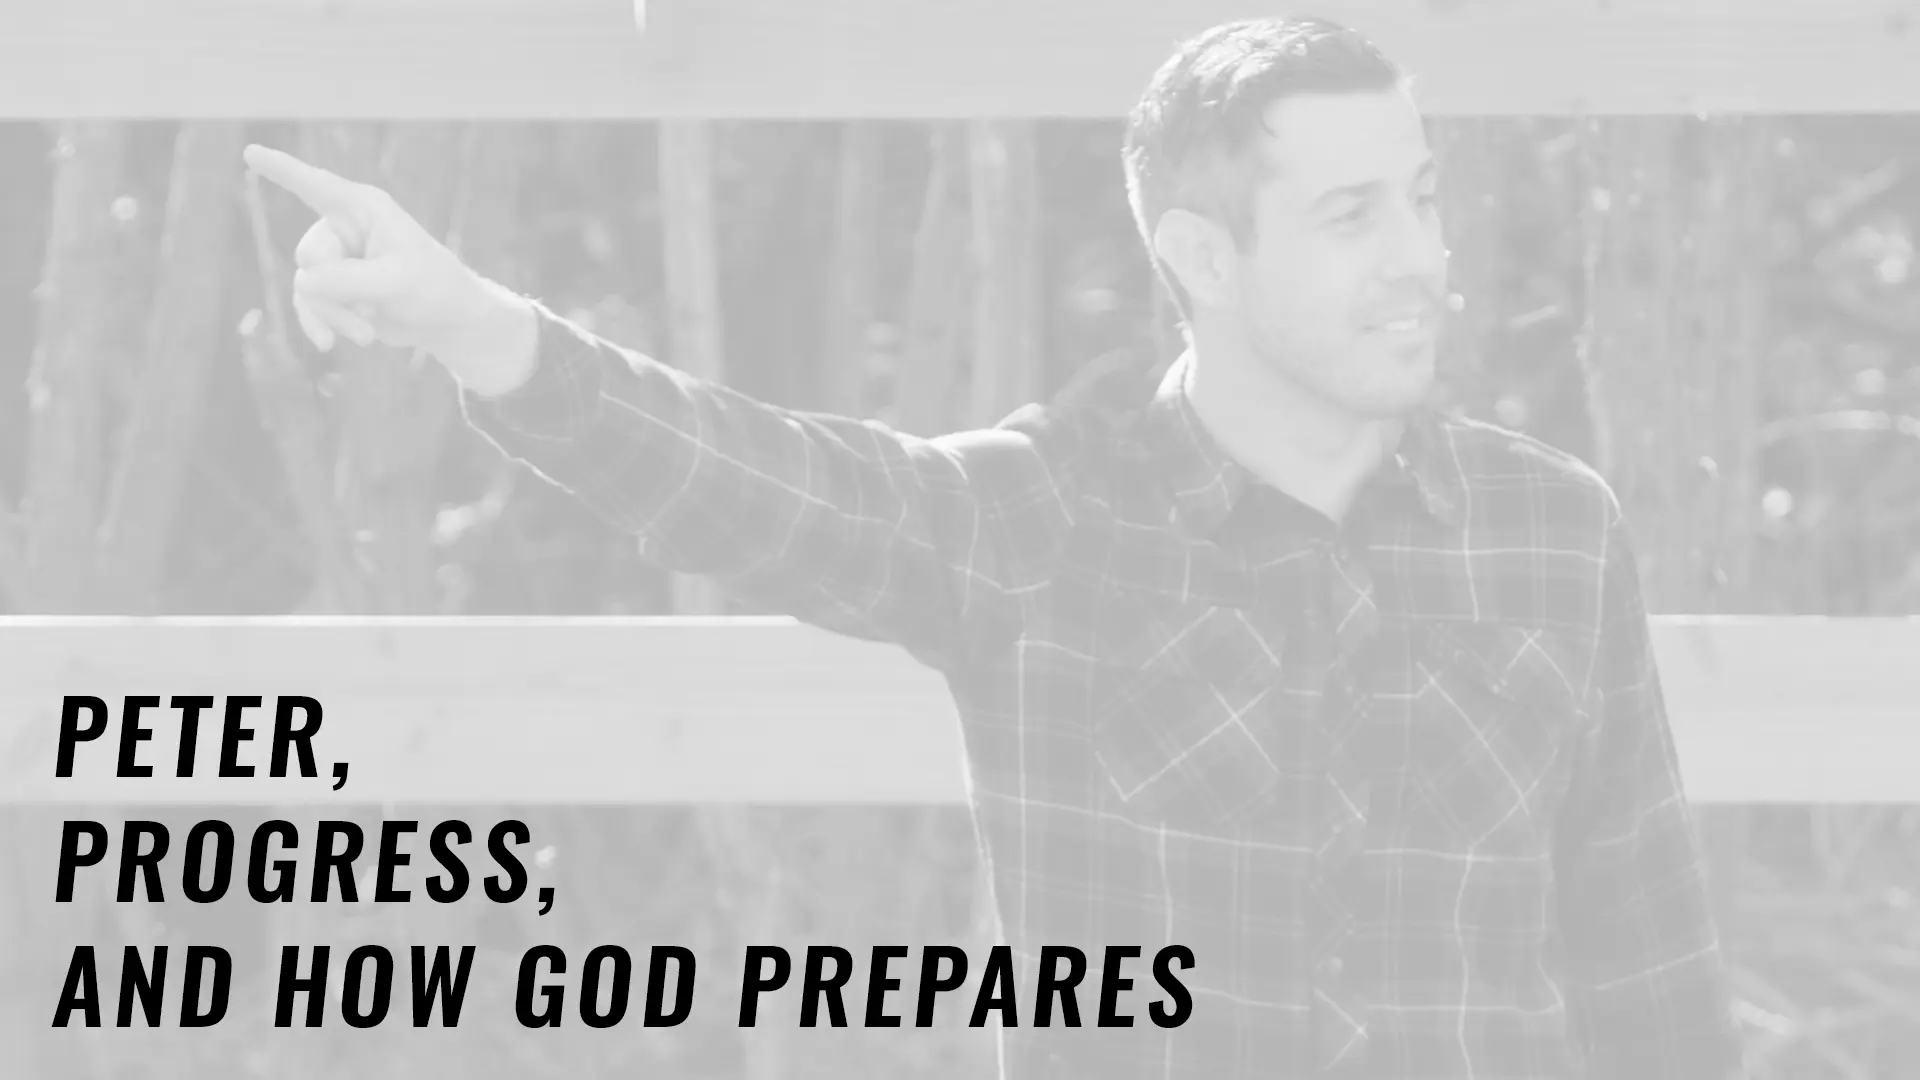 Featured image for “Peter, Progress, and How God Prepares”